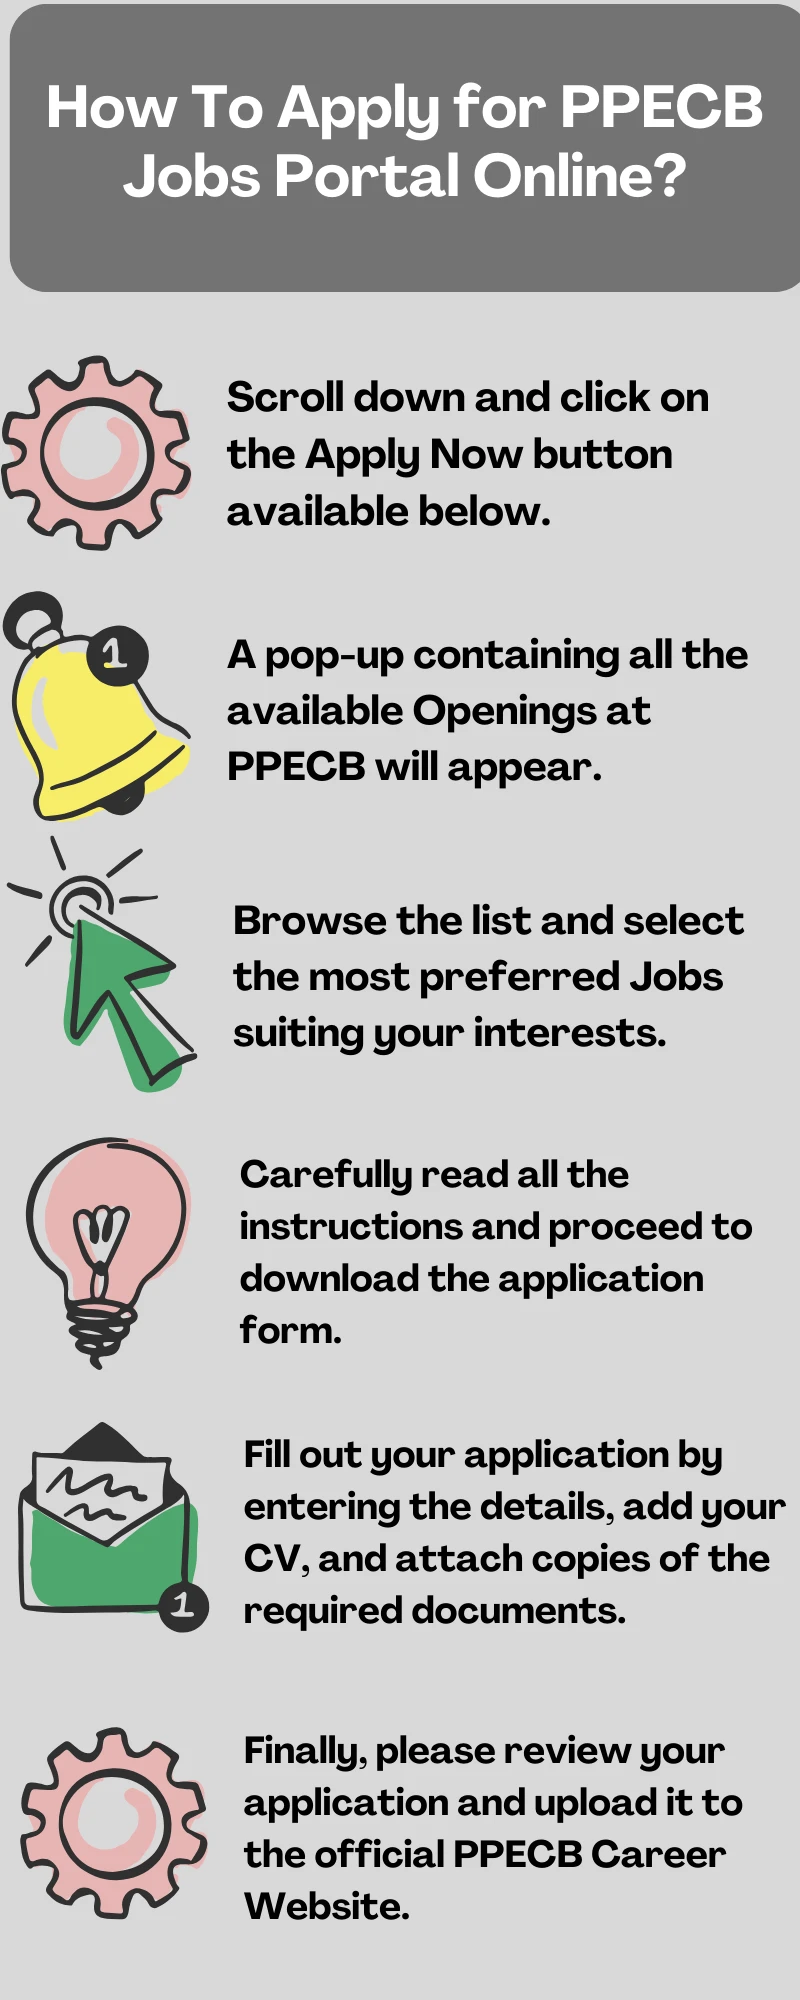 How To Apply for PPECB Jobs Portal Online?